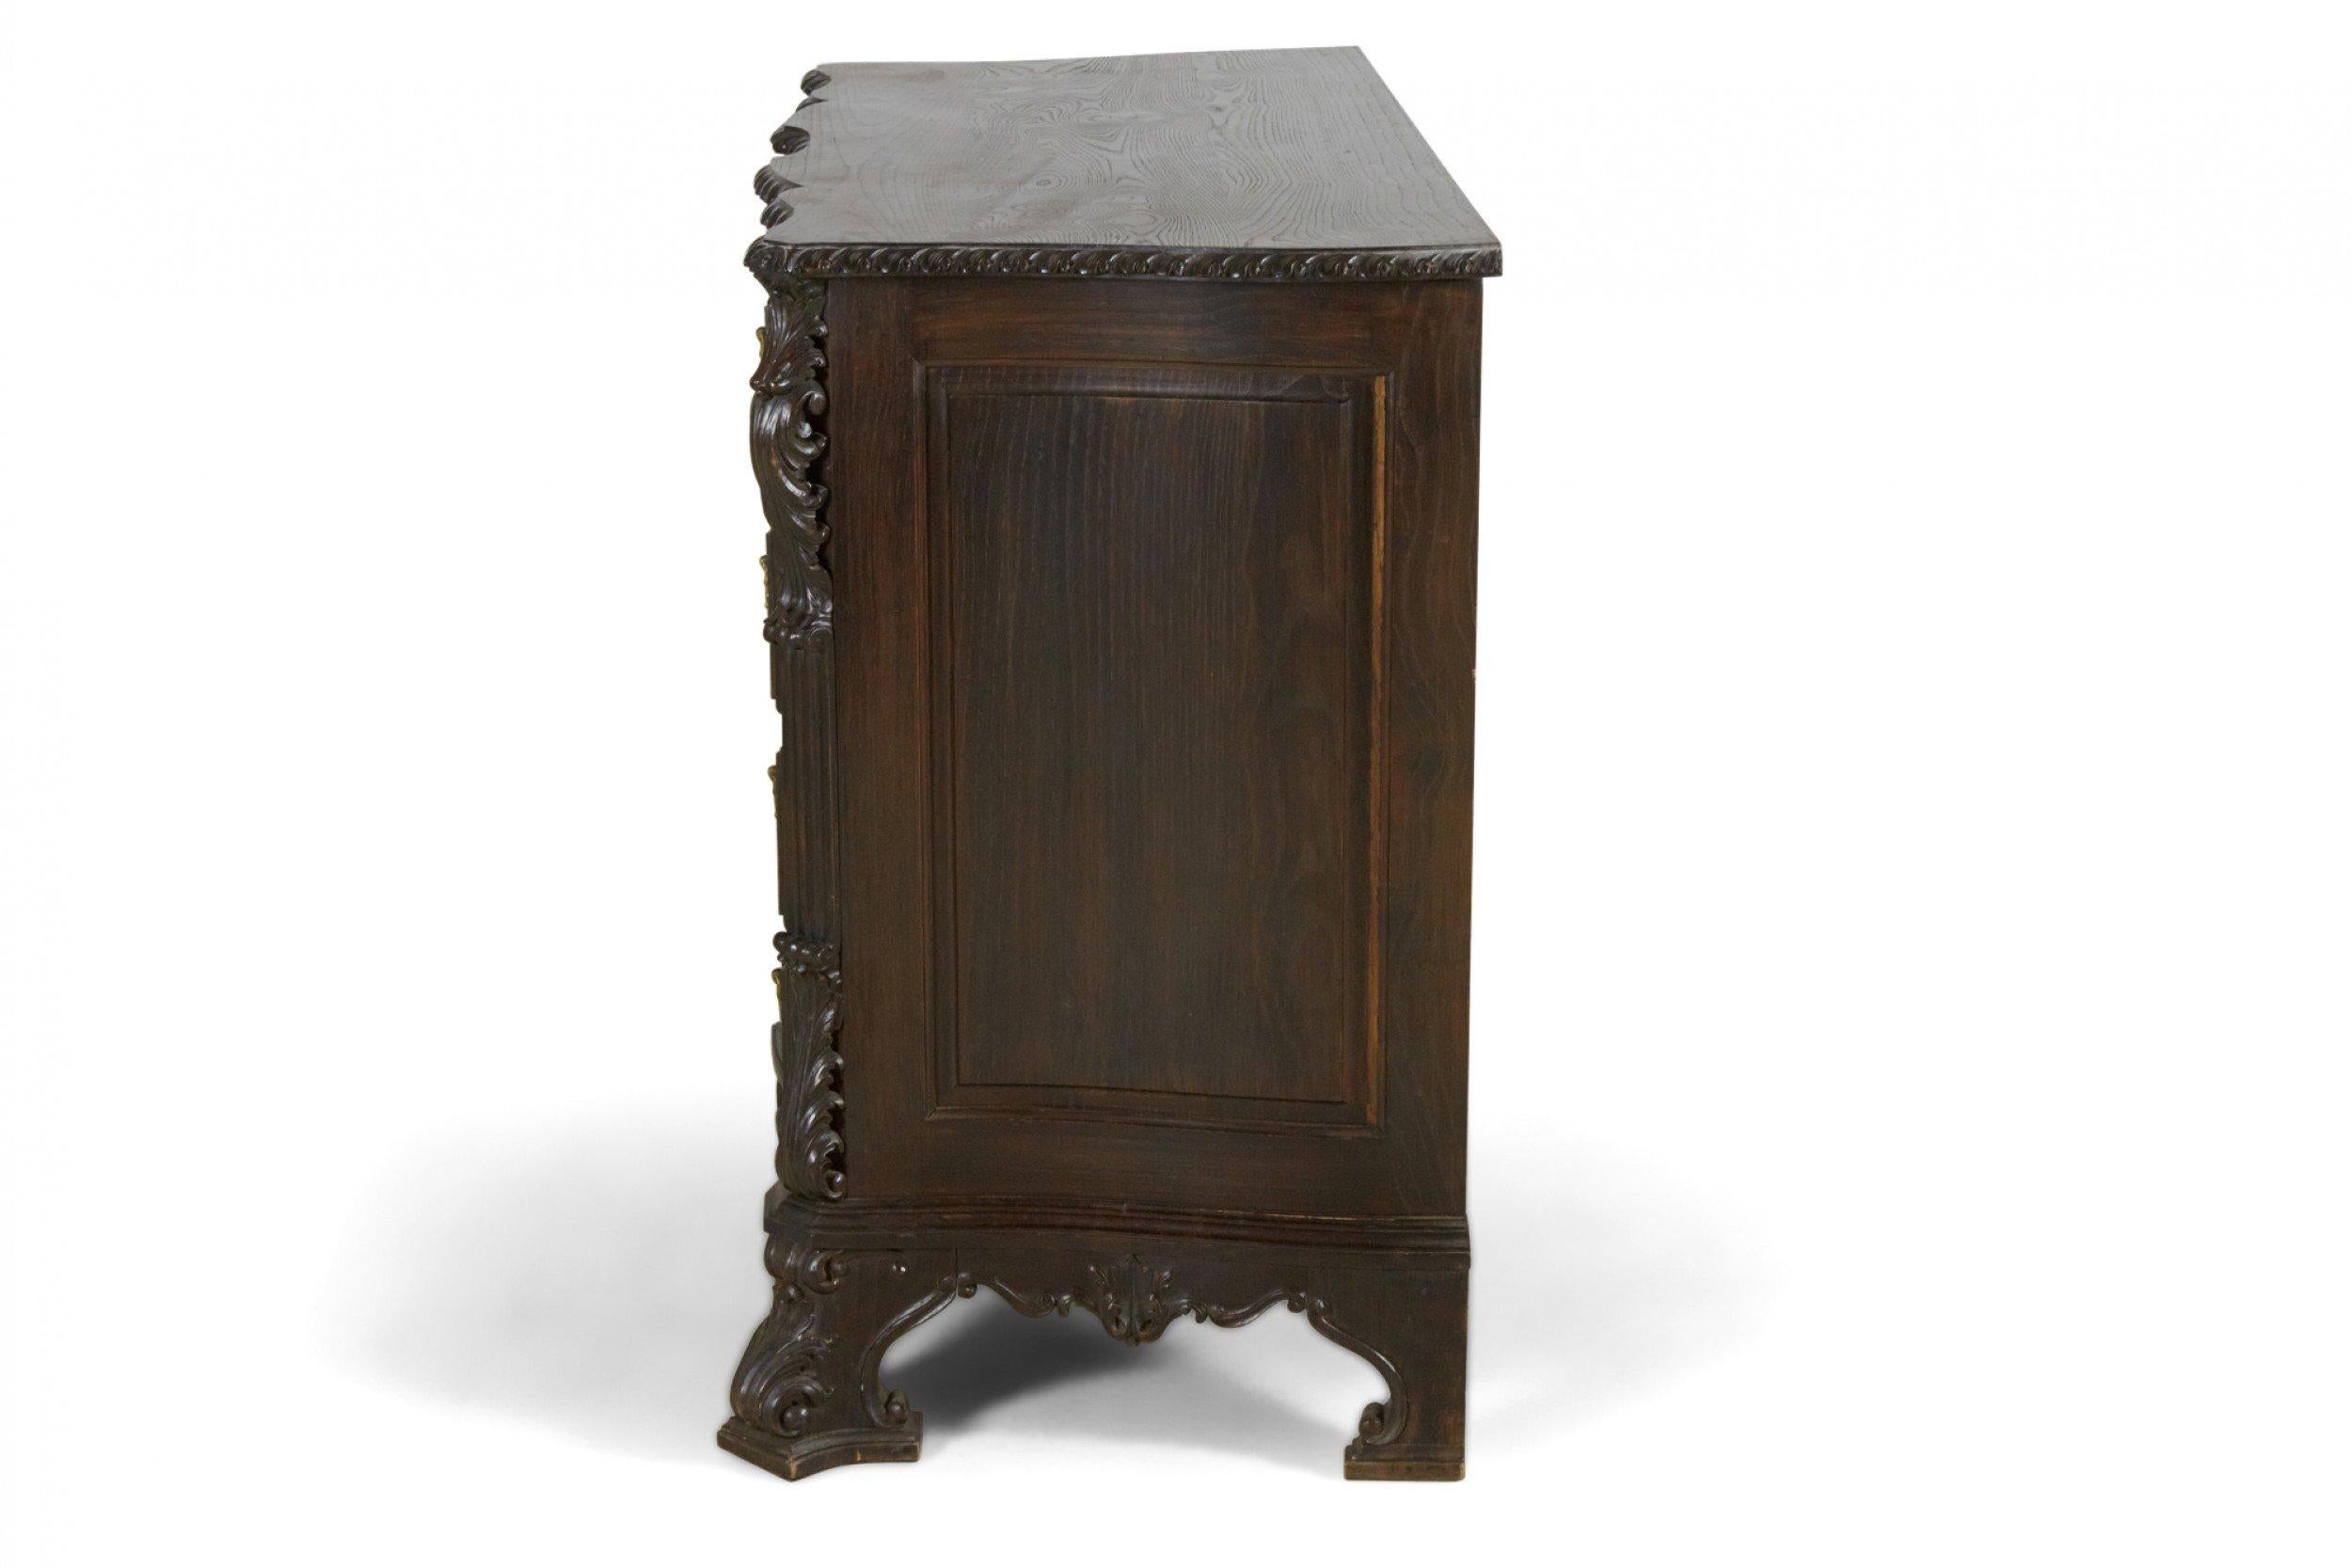 French Provincial style (20th Century) 5-drawer dresser, dark stained pine with ornate brass handles and carved features, foliate scroll sides and serpentine shaped front.